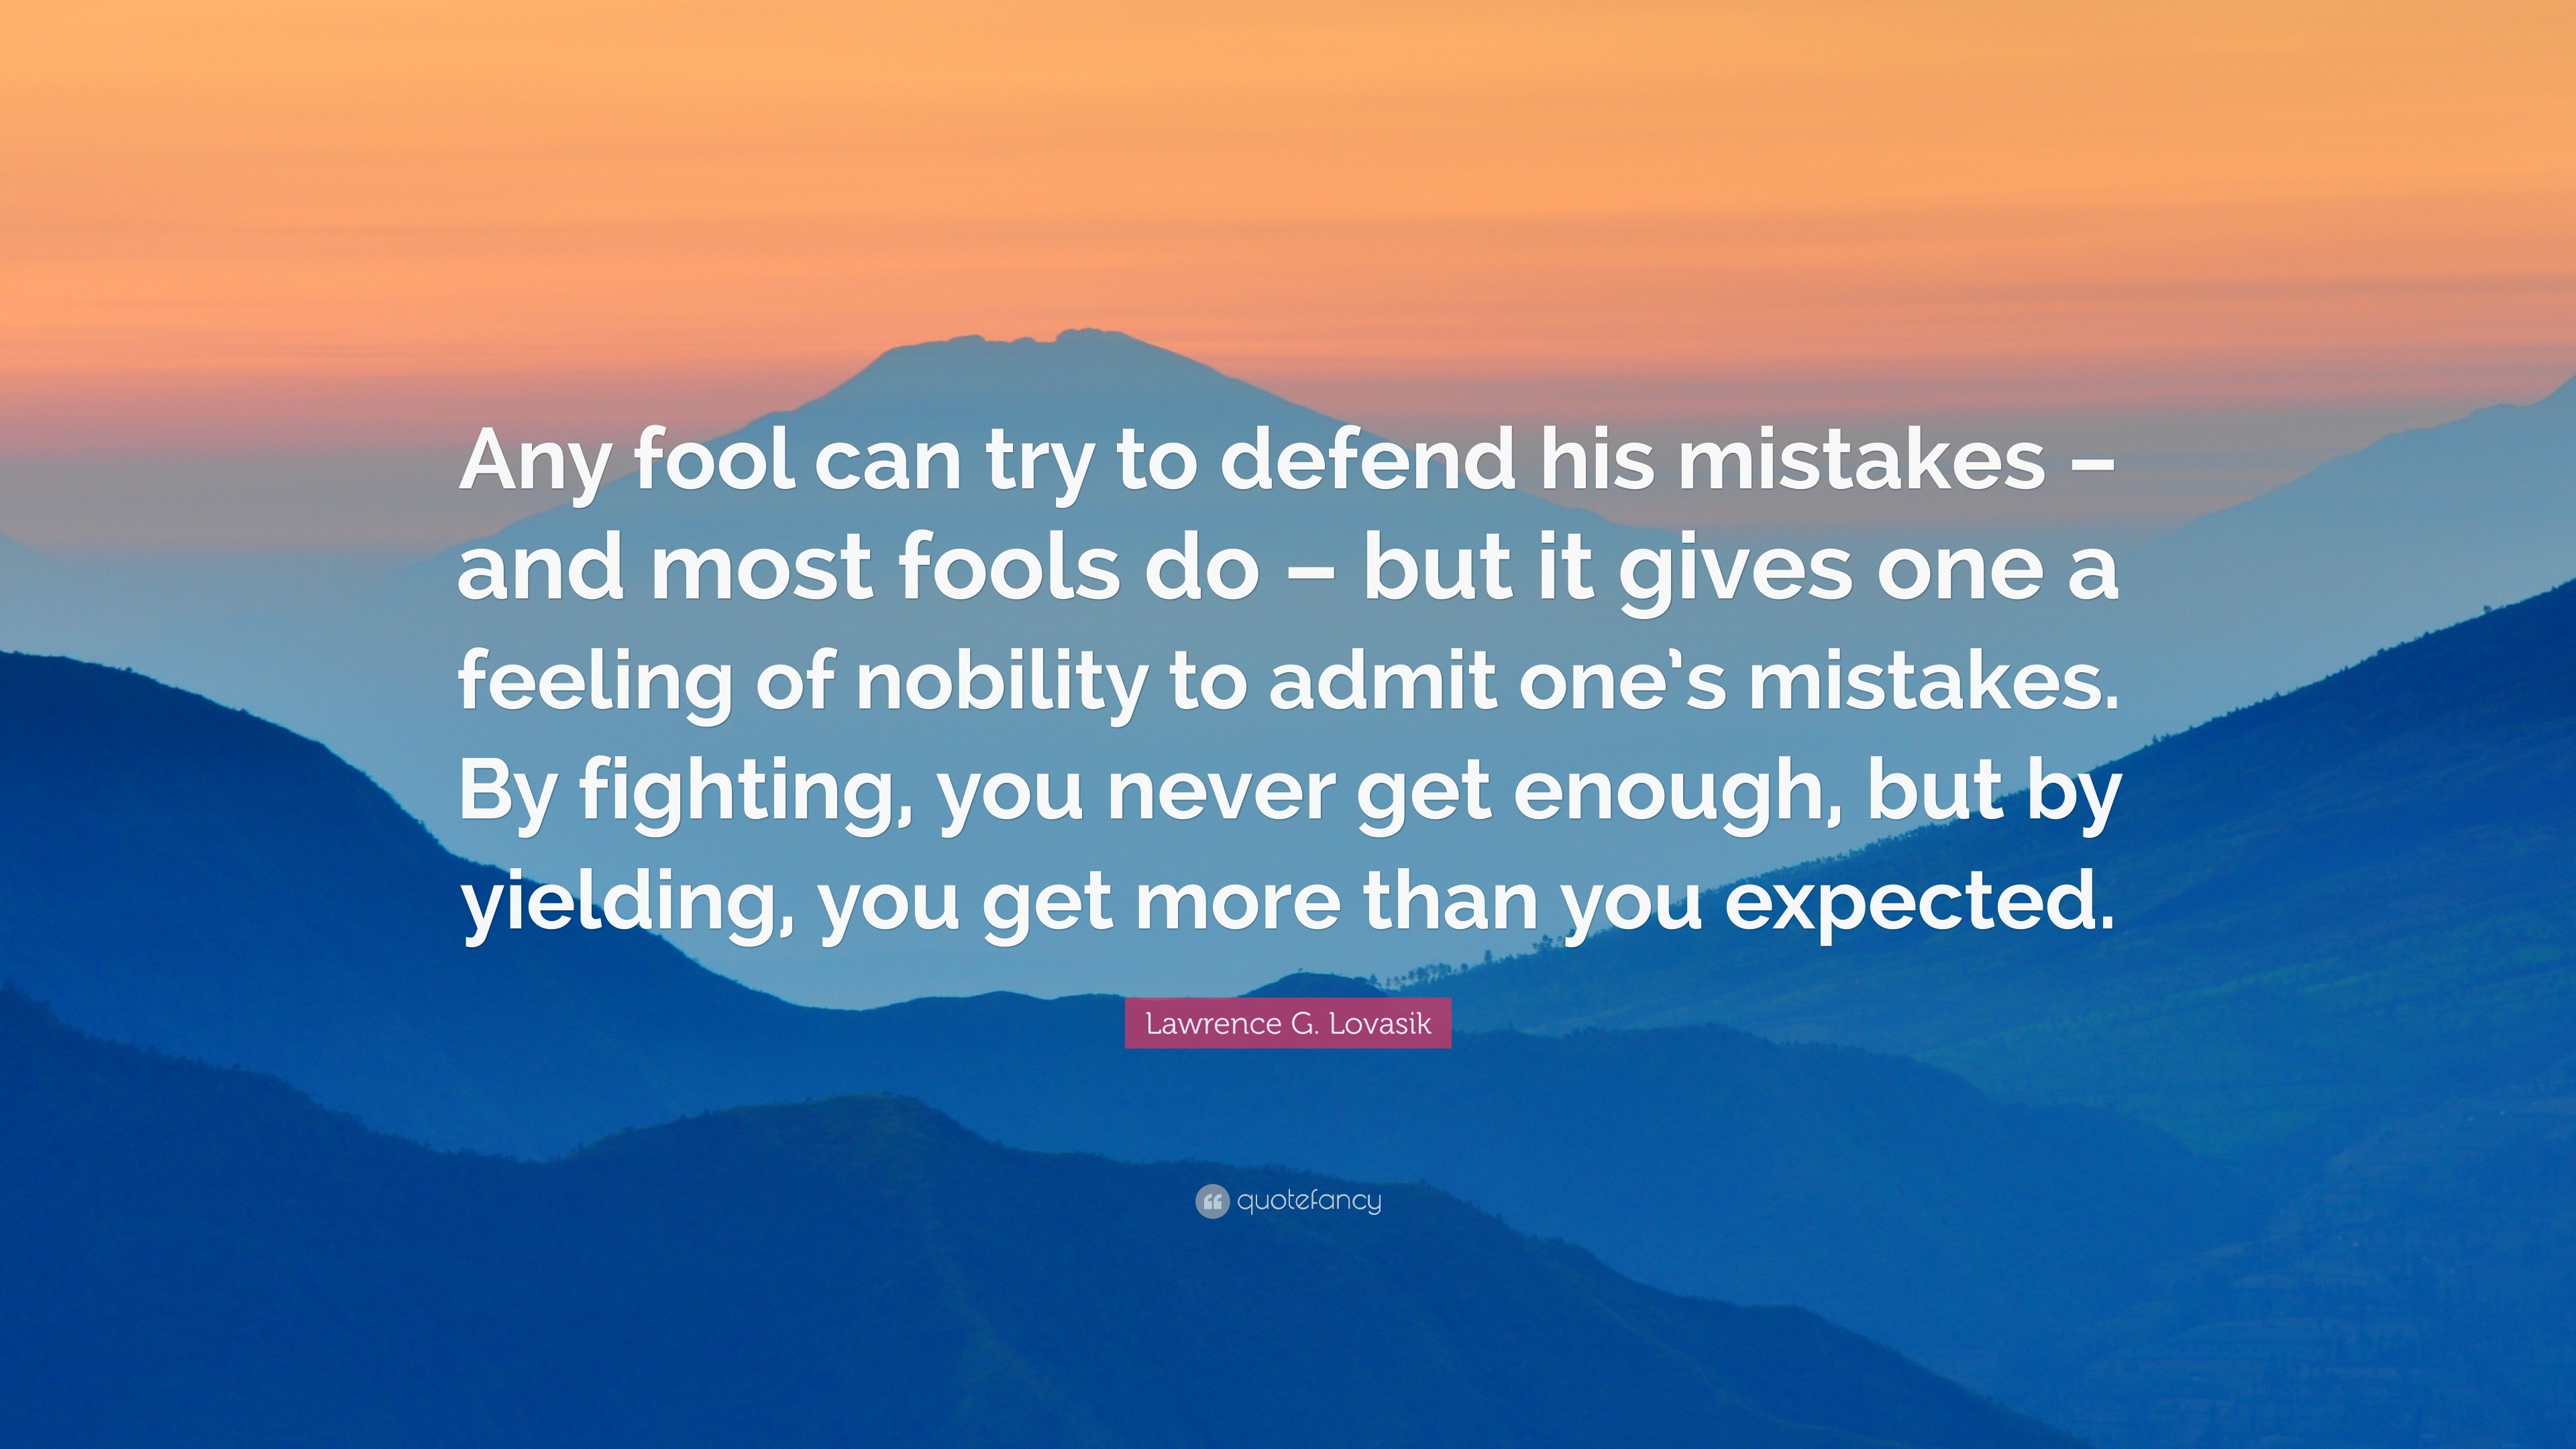 Lawrence G. Lovasik Quote: “Any fool can try to defend his mistakes ...